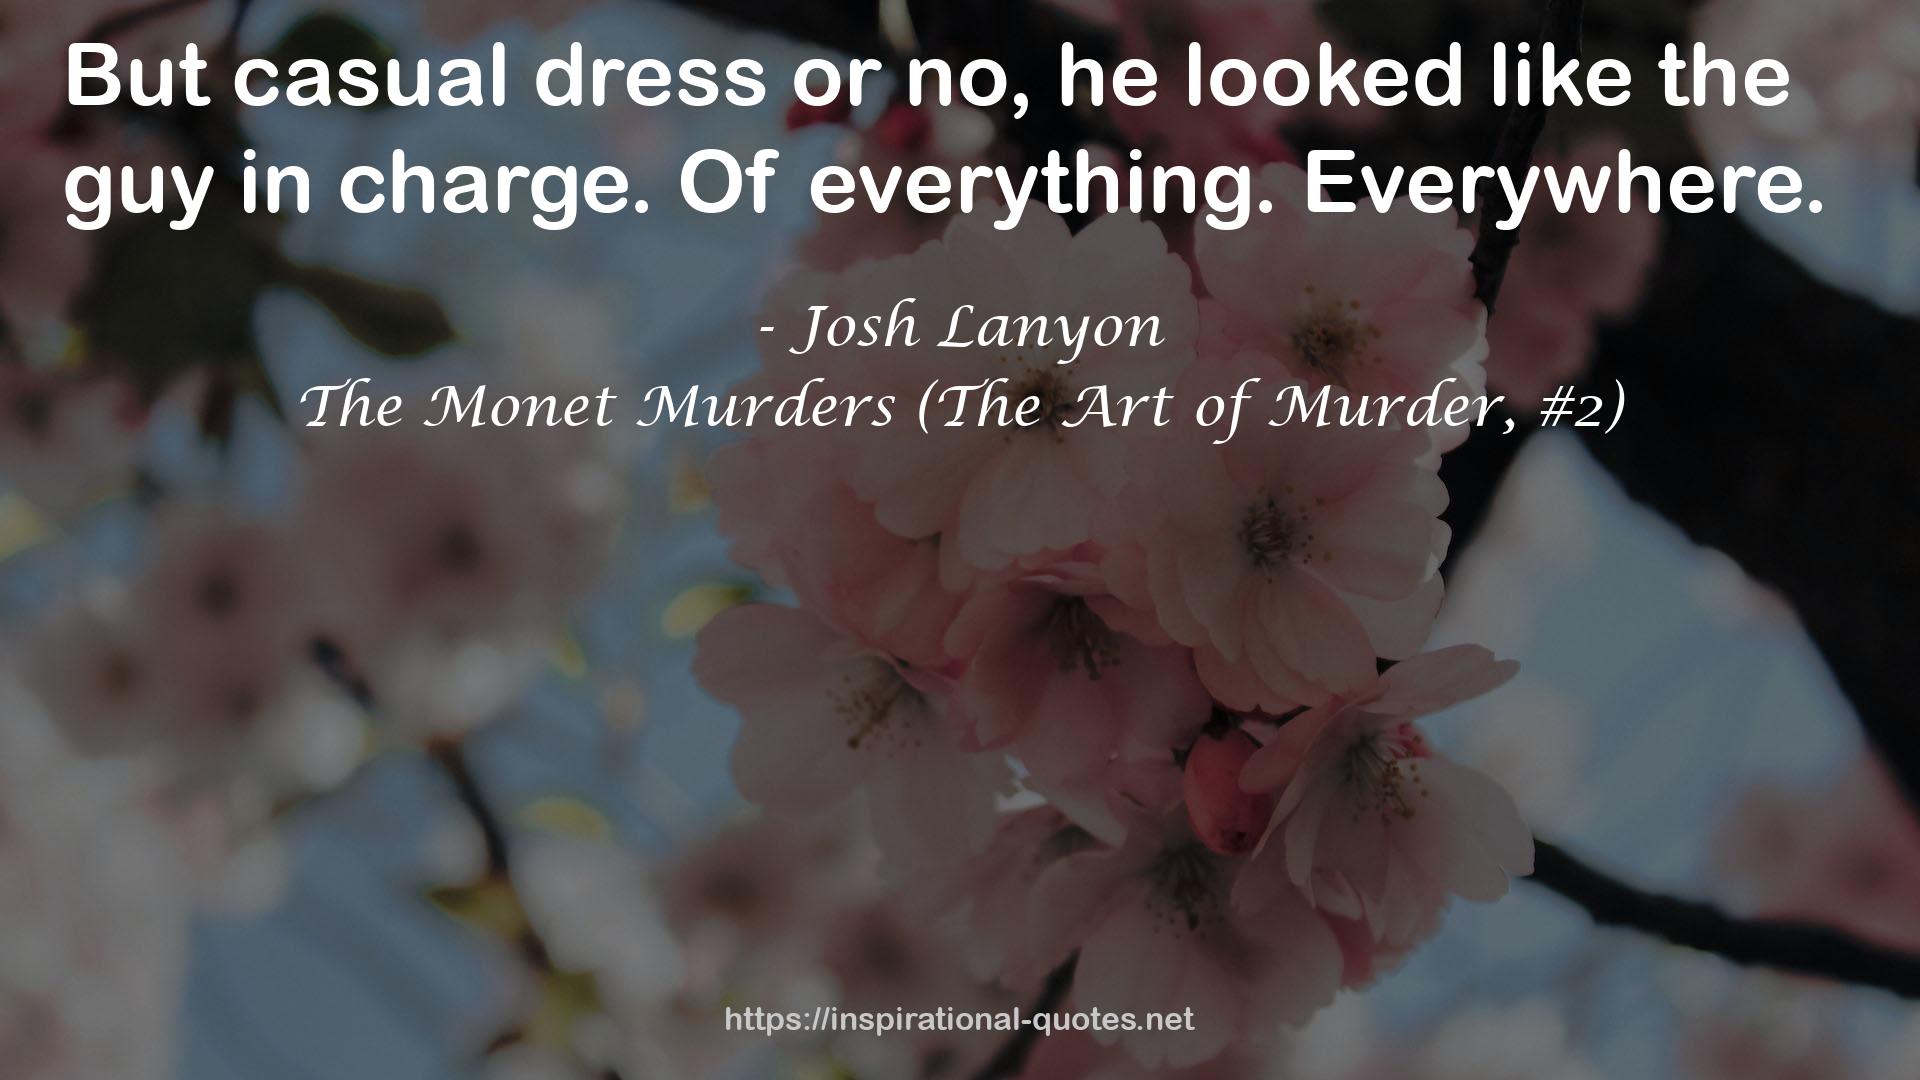 The Monet Murders (The Art of Murder, #2) QUOTES